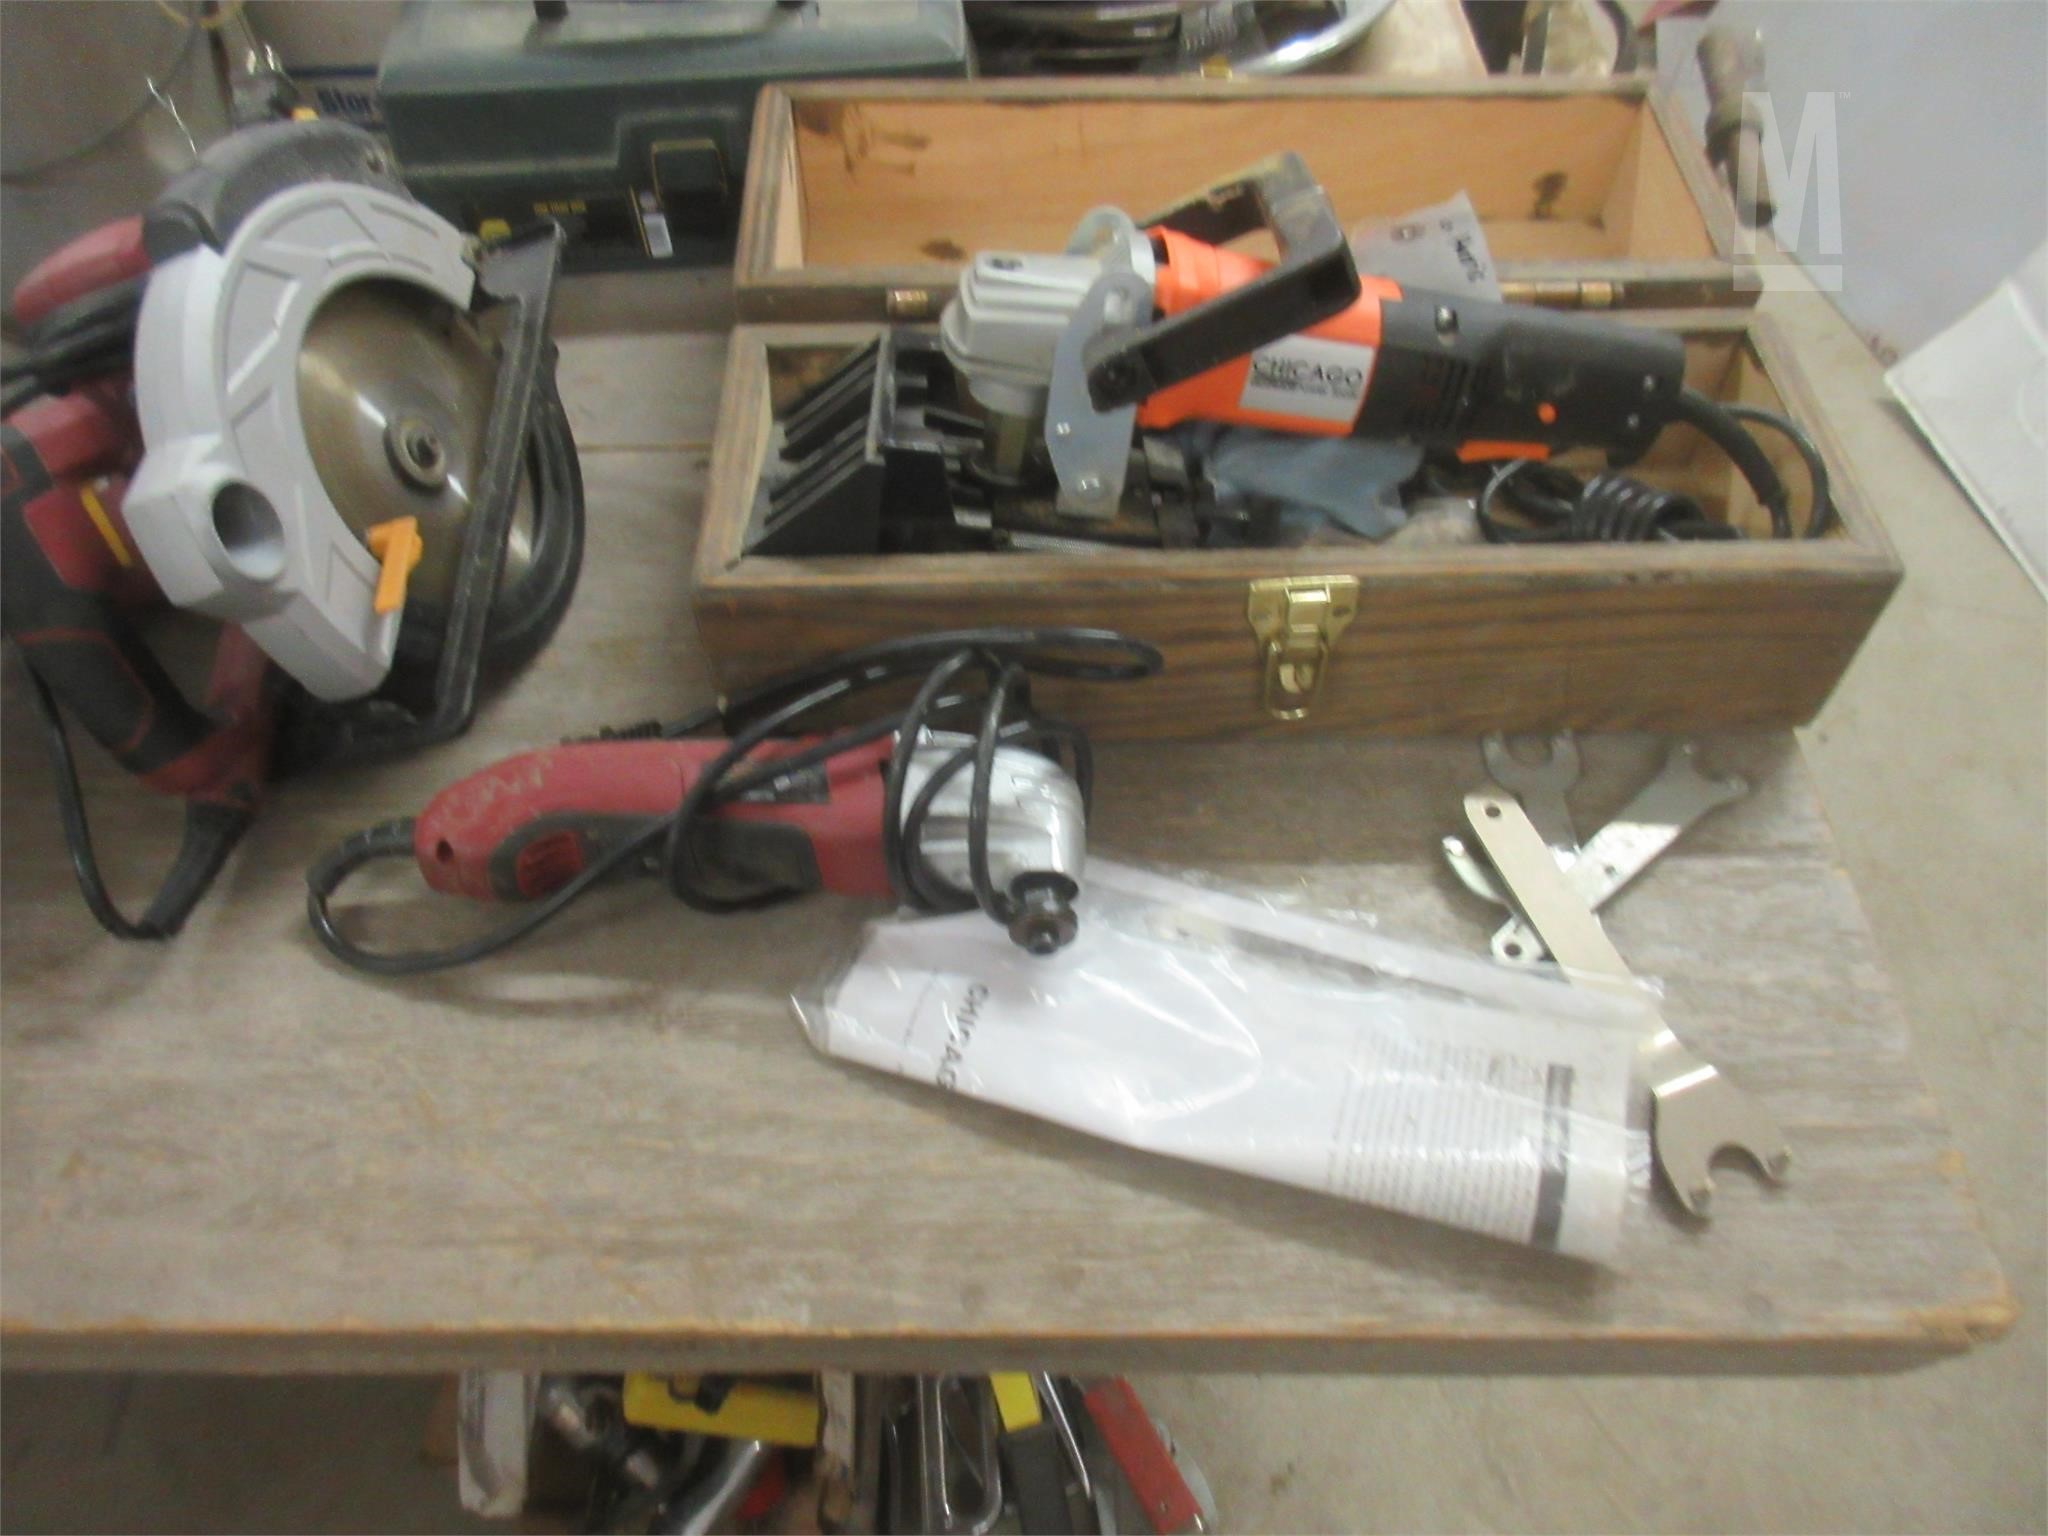 Black & Decker Firestorm Cordless Tools, Chainsaw, Circular Saw and Drill -  Roller Auctions